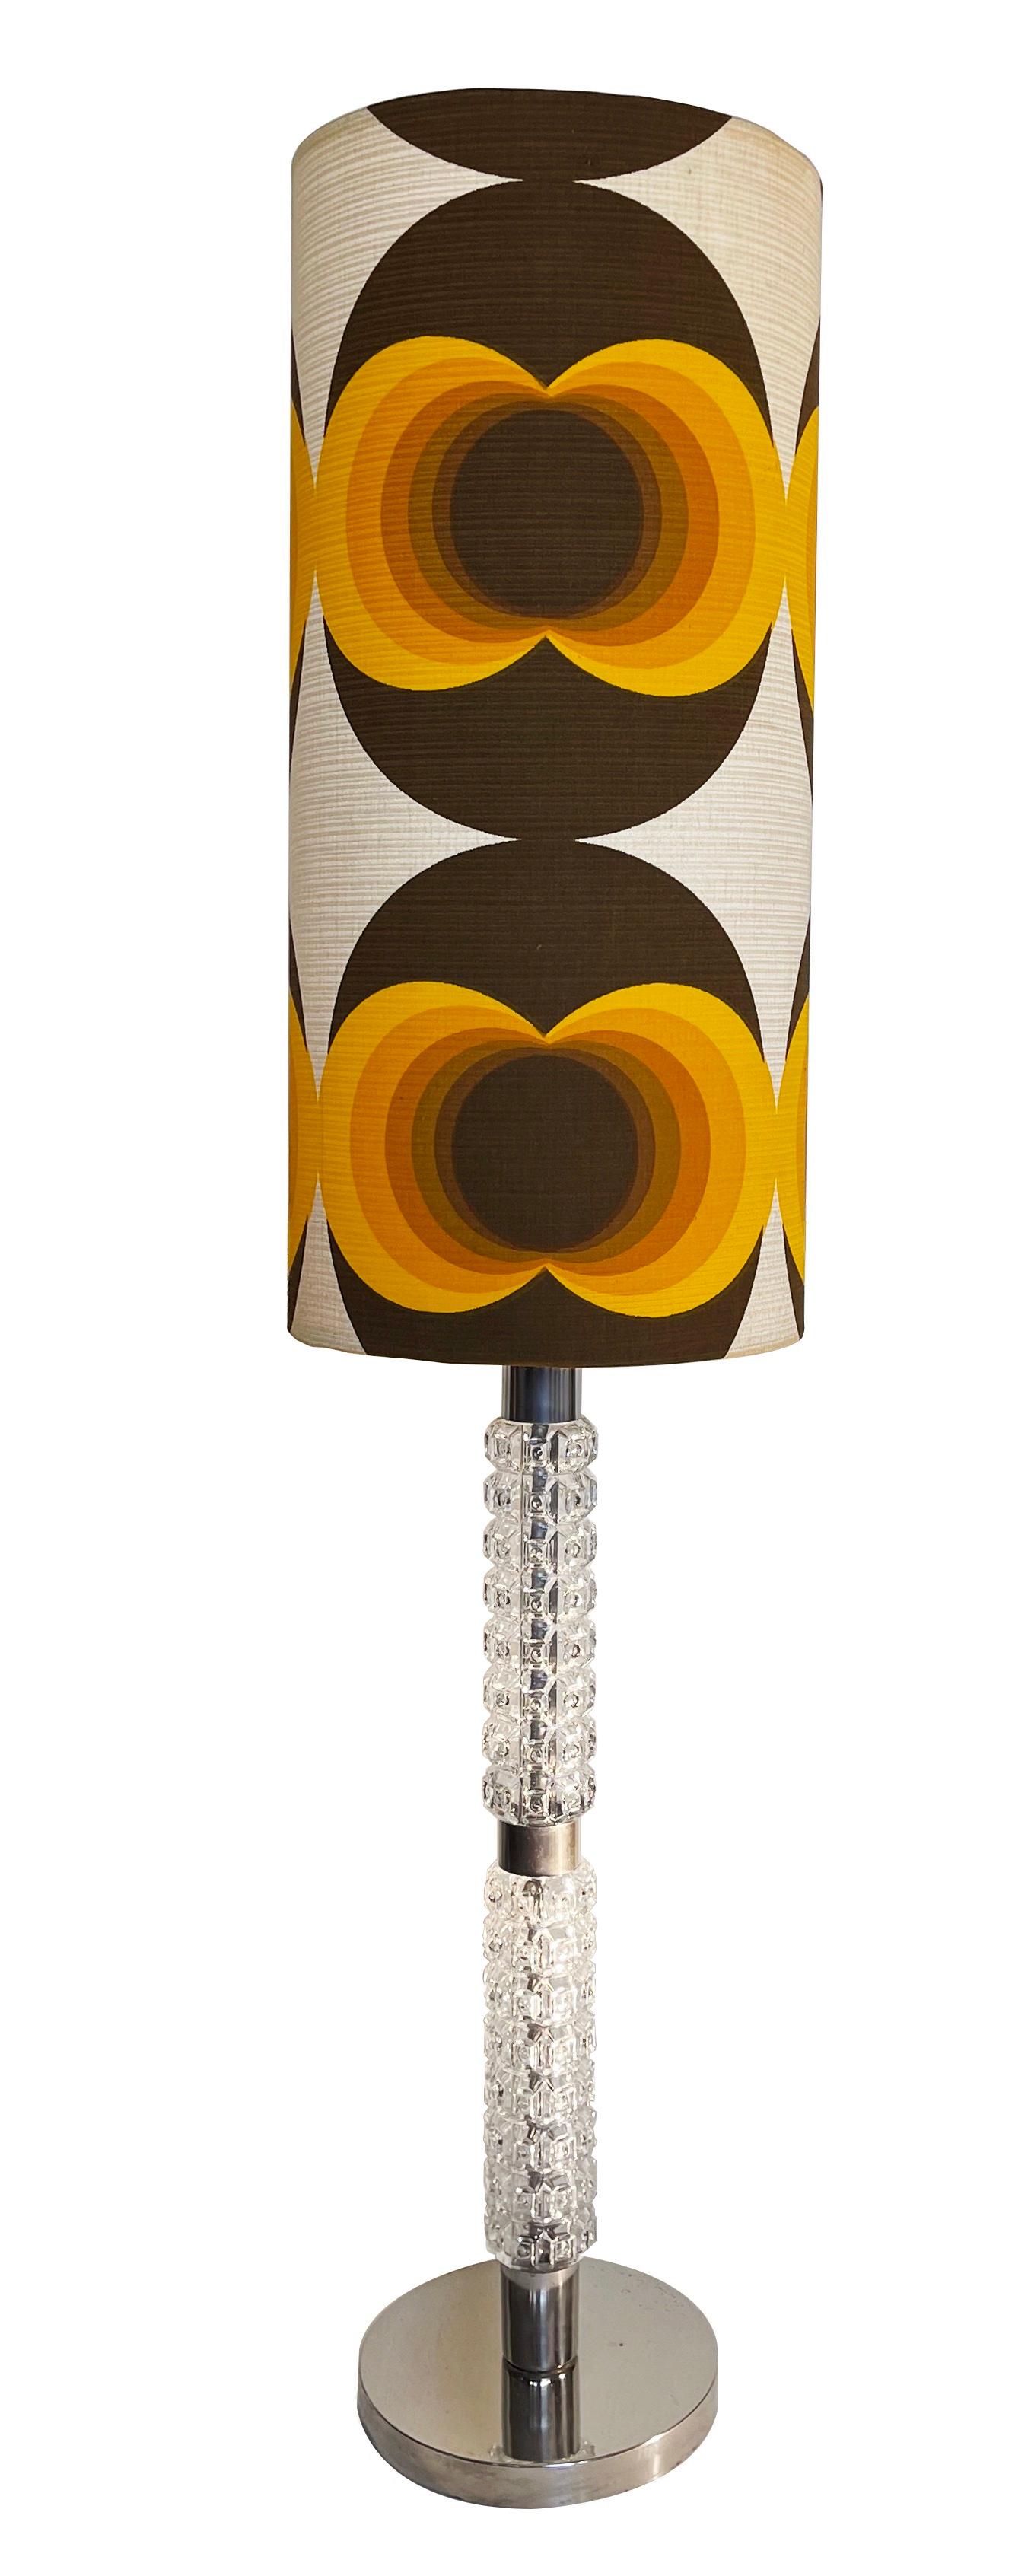 Expressive large floor lamp – here with the very best of the German 60s-70s design flair.
Vibrantly coloured and equally wild patterned lampshade in oranges, browns & beige, combined with the absolute classic of the 70's: a chrome stand with chunky,